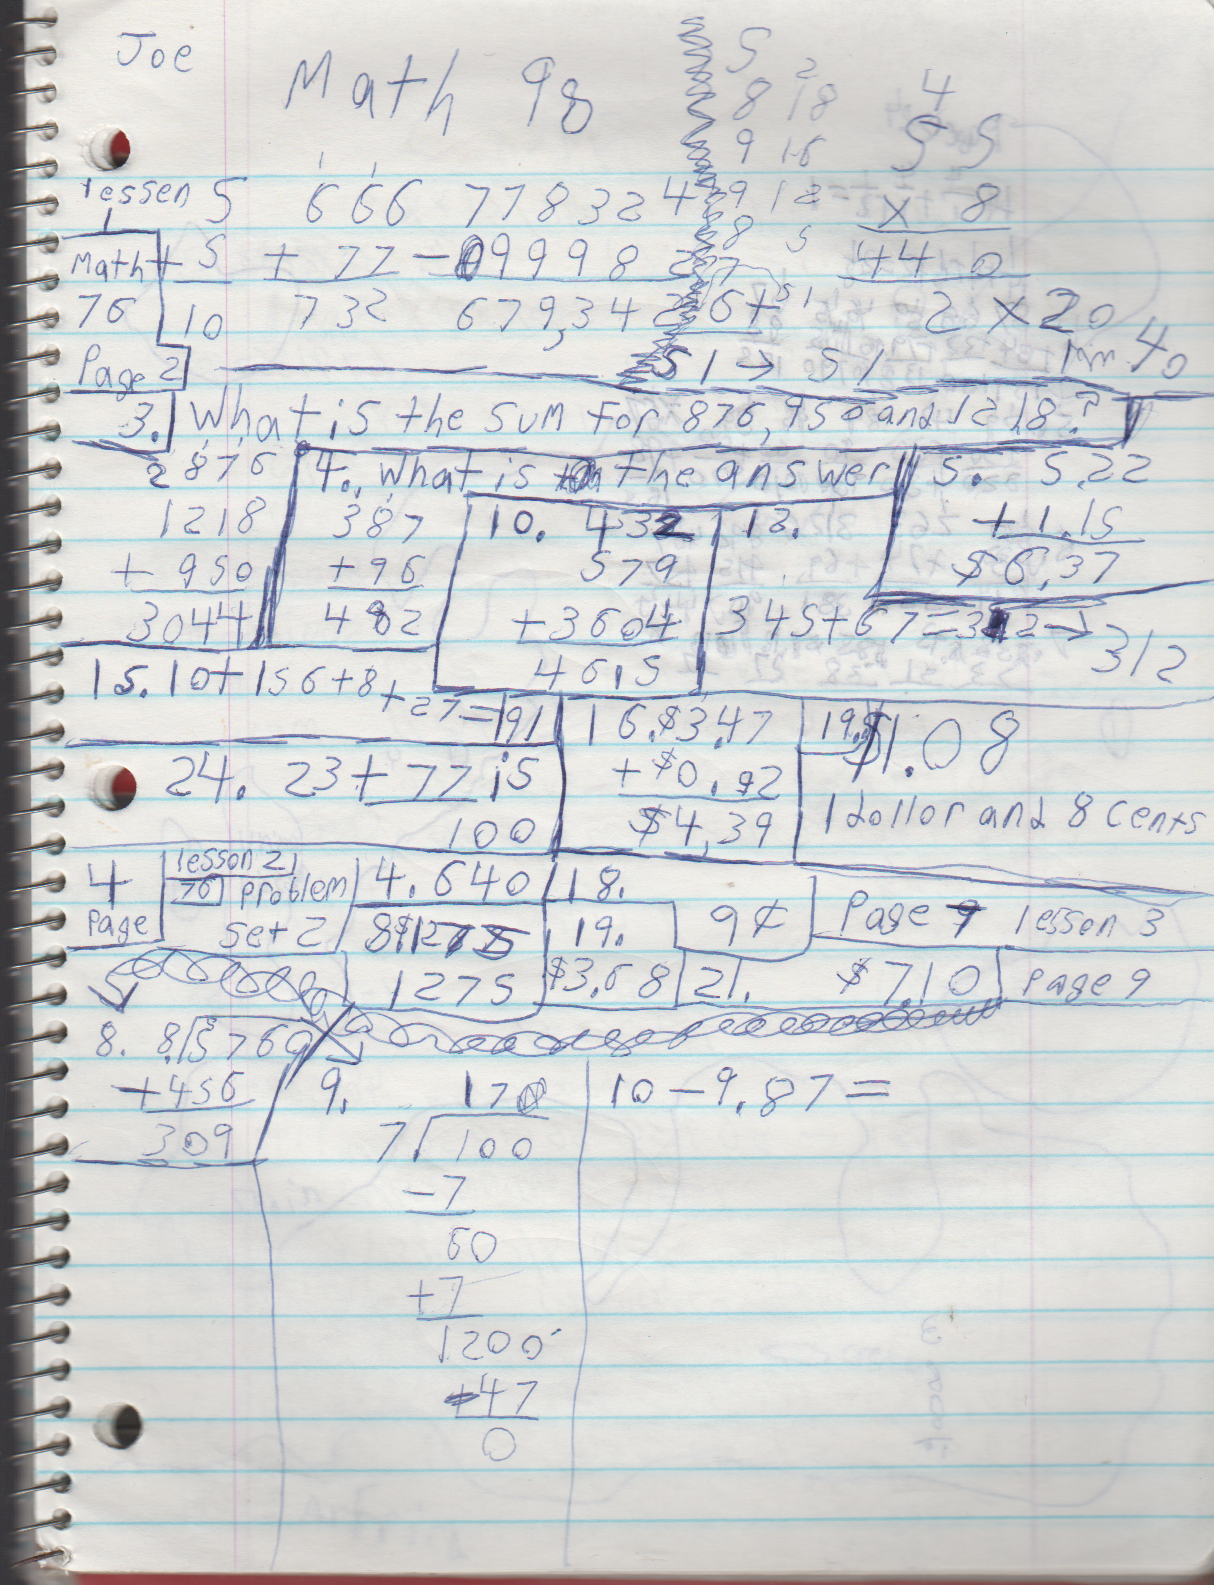 1996-08-18 - Saturday - 11 yr old Joey Arnold's School Book, dates through to 1998 apx, mostly 96, Writings, Drawings, Etc-033.png